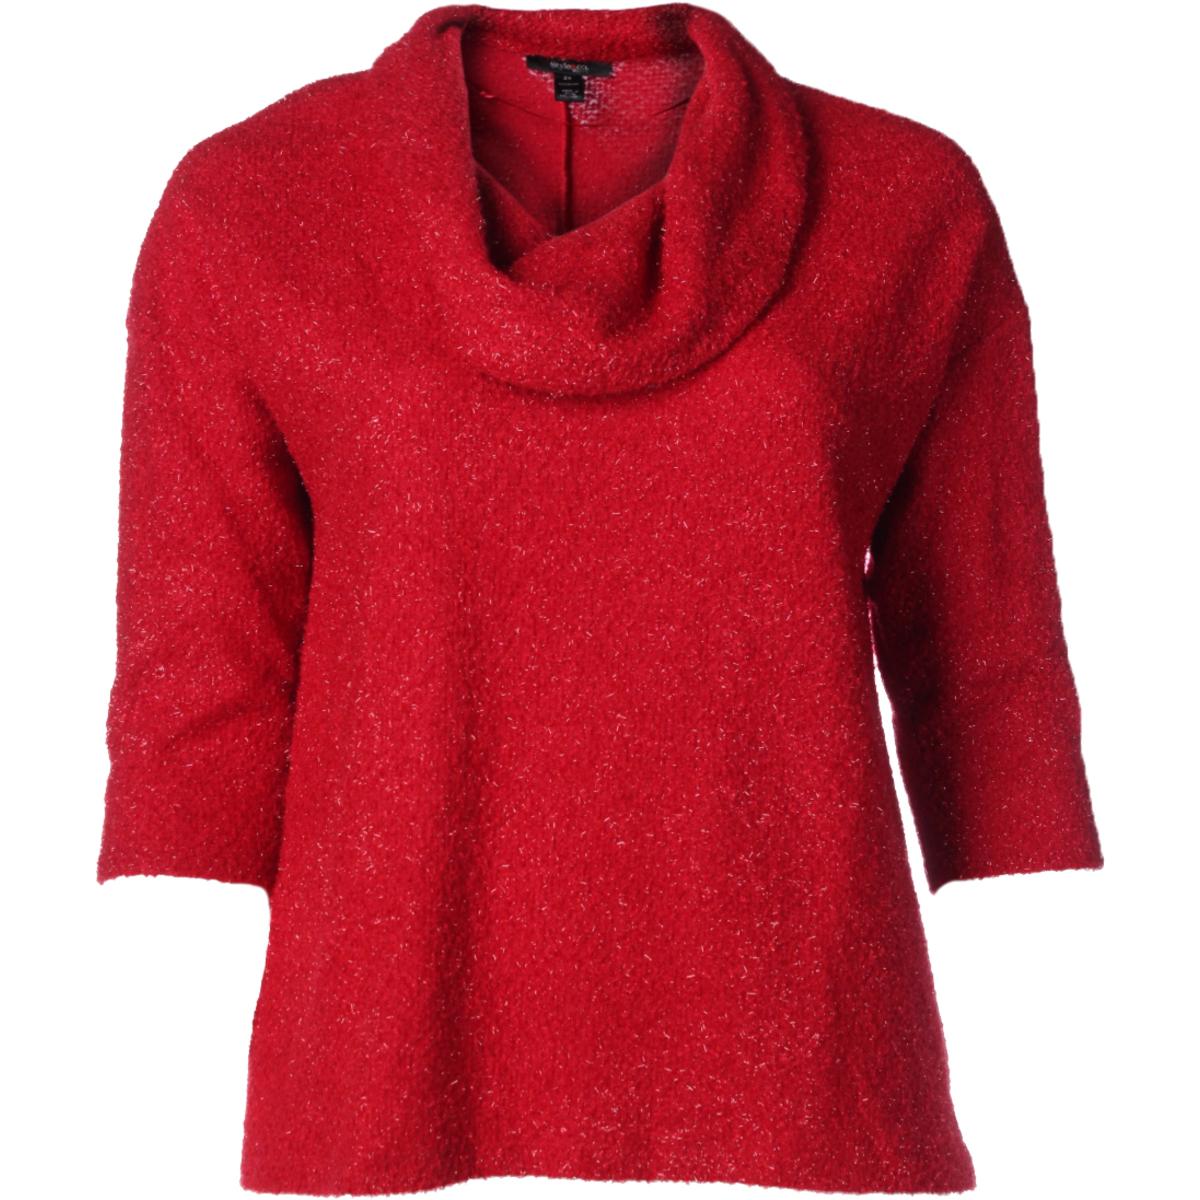 style-co-3581-womens-red-metallic-knit-cowl-neck-sweater-top-plus-0x